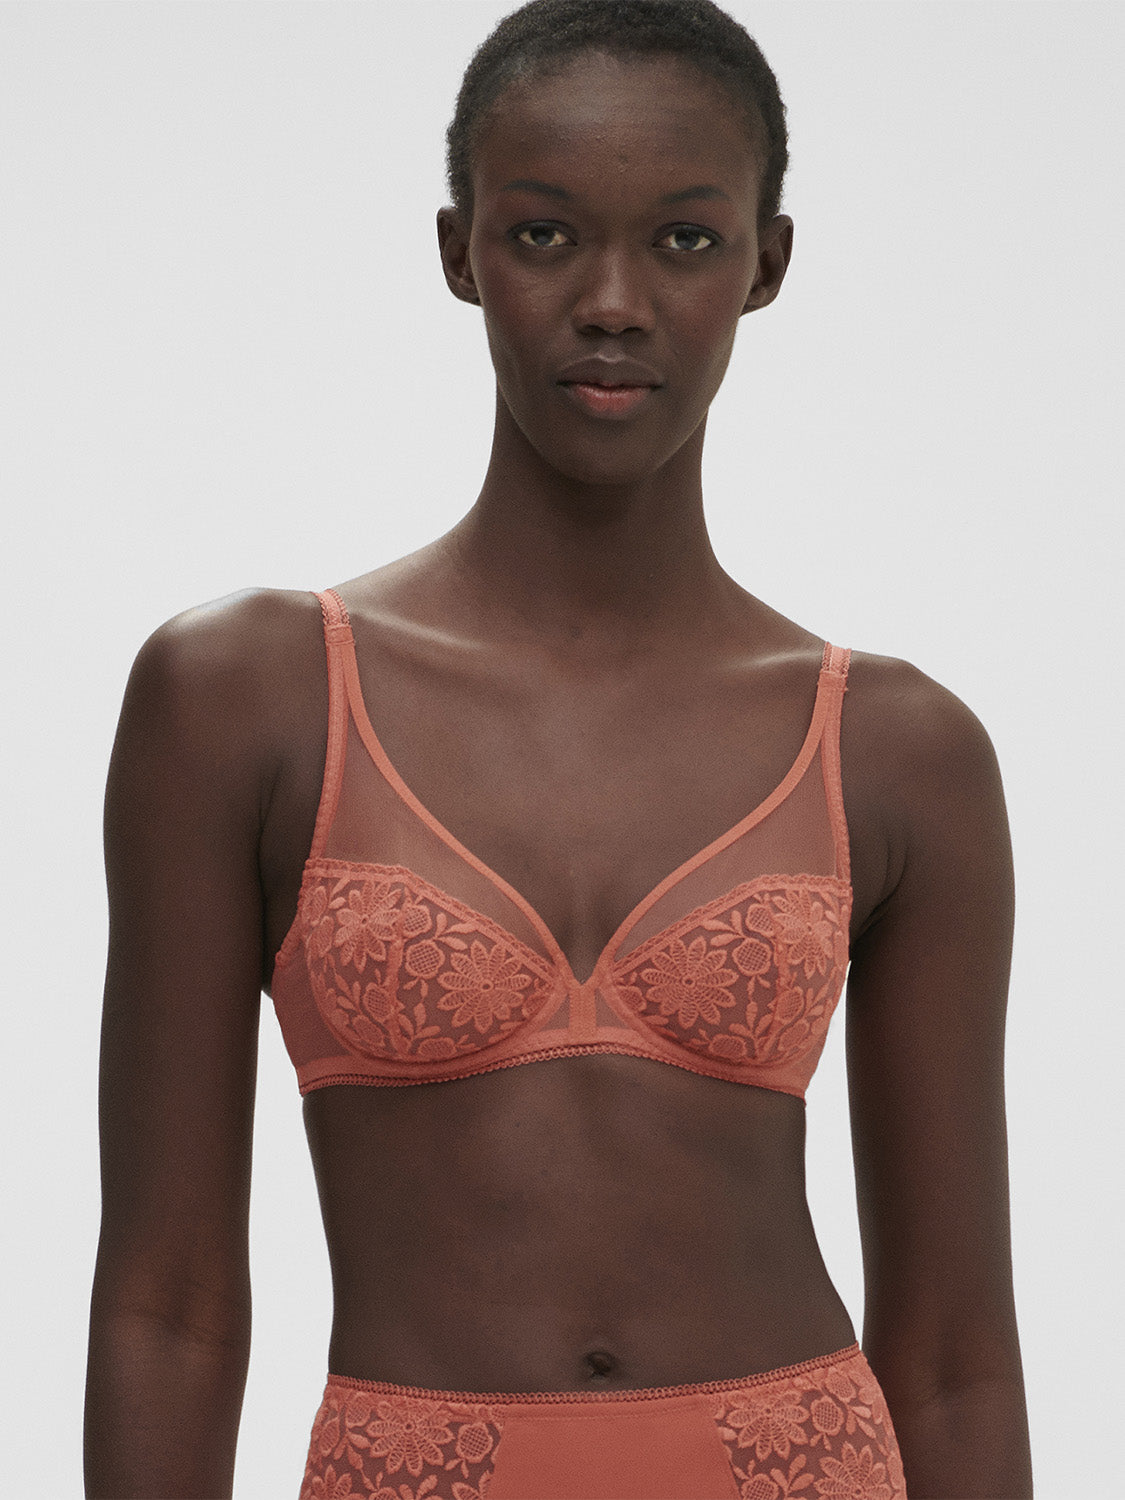 Simone Perele Asta Triangle Push-Up Bra in Navy FINAL SALE (50% Off) -  Busted Bra Shop